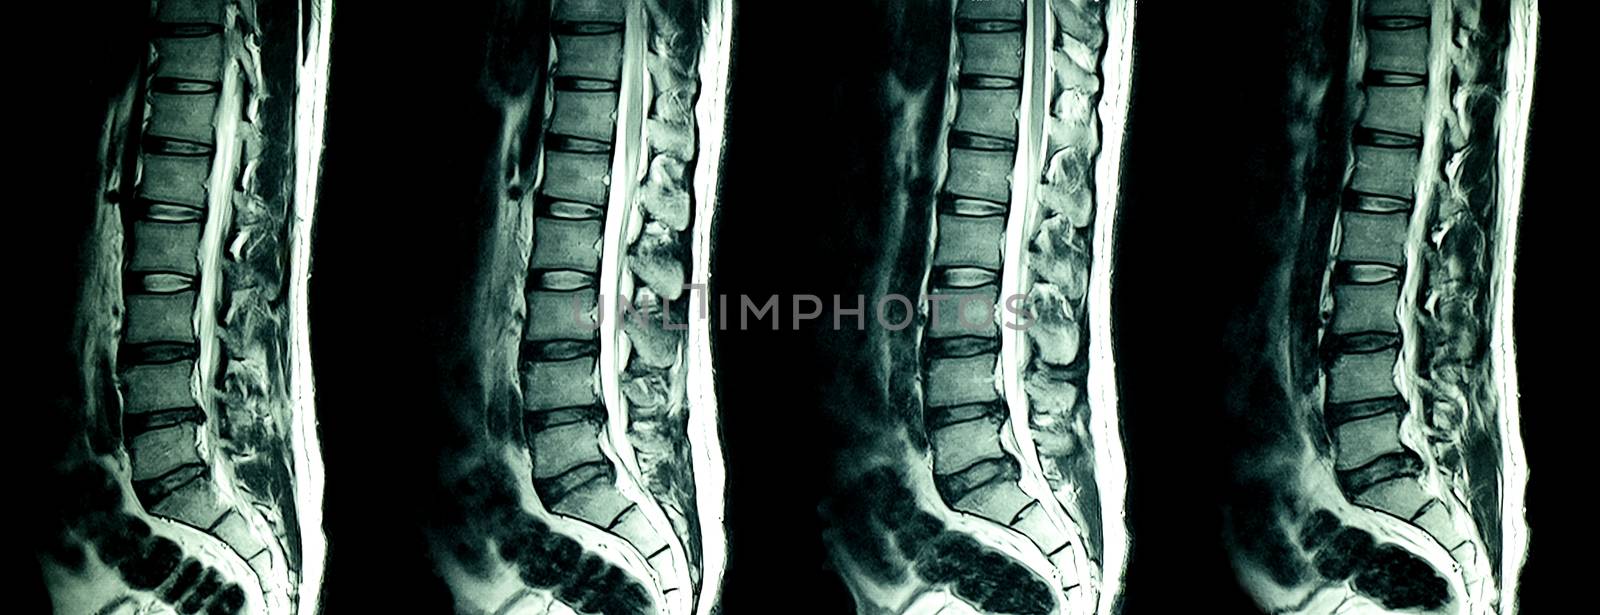 MRI scan of lumbar spines of a patient with chronic back pain showing degenerative change of the lumbar and sacral spines with disc dessication and disc space narrowing and central bulging of L3-4 disc